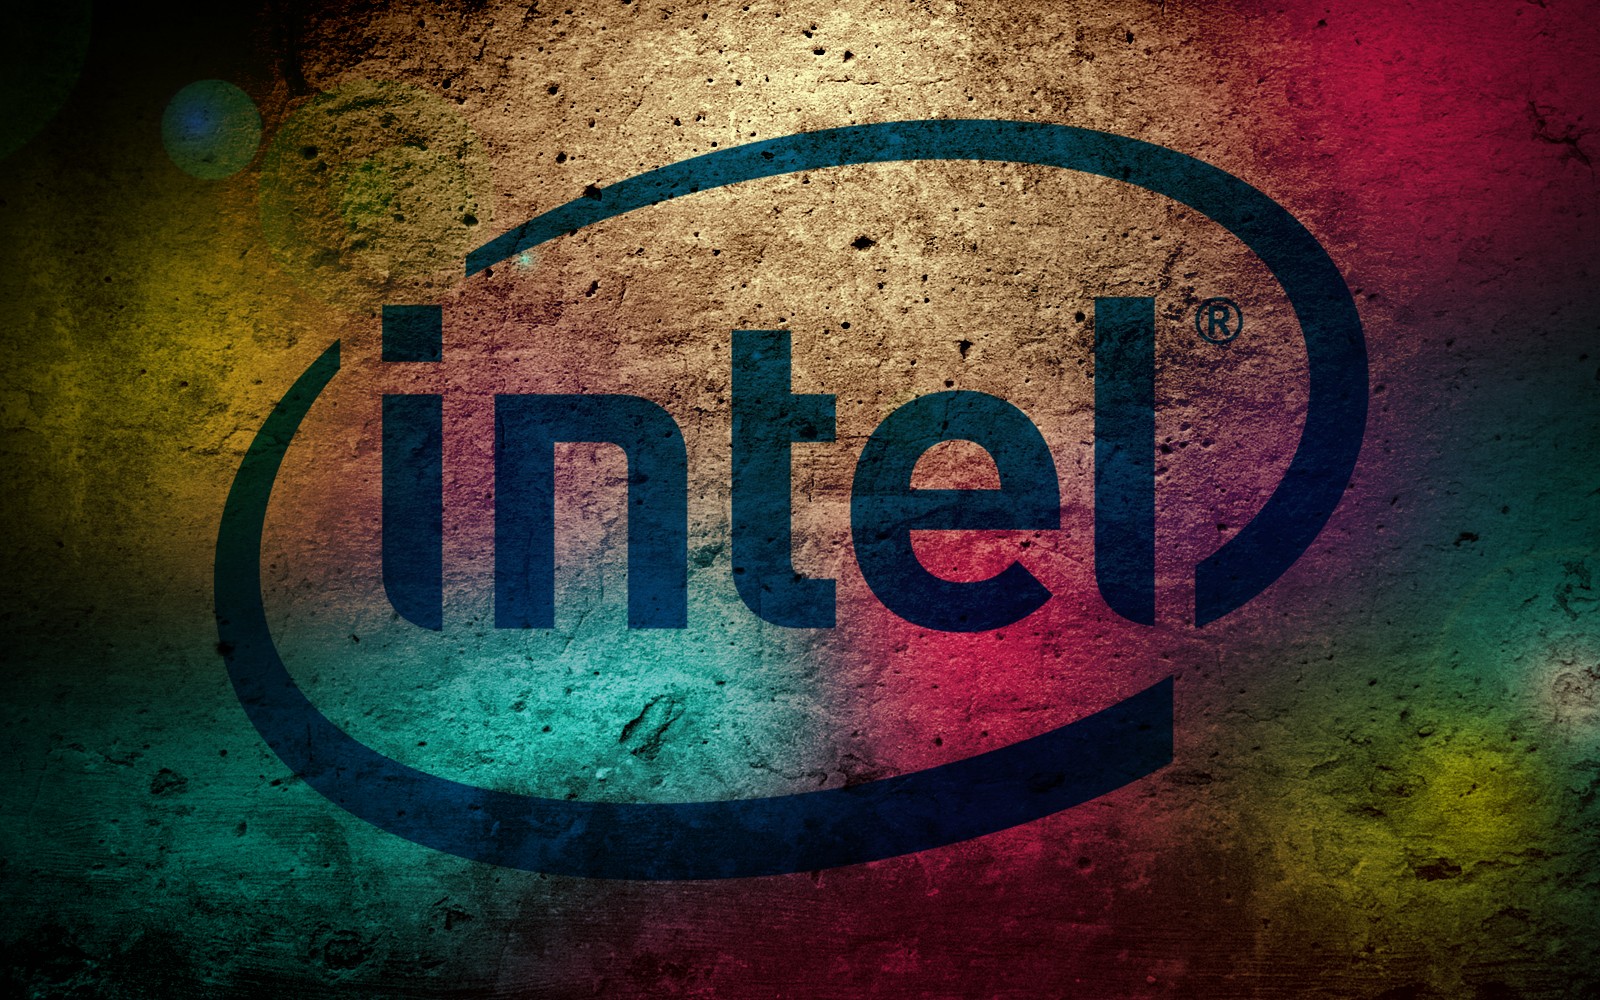 Intel Hd Wallpapers Wallpapers Records